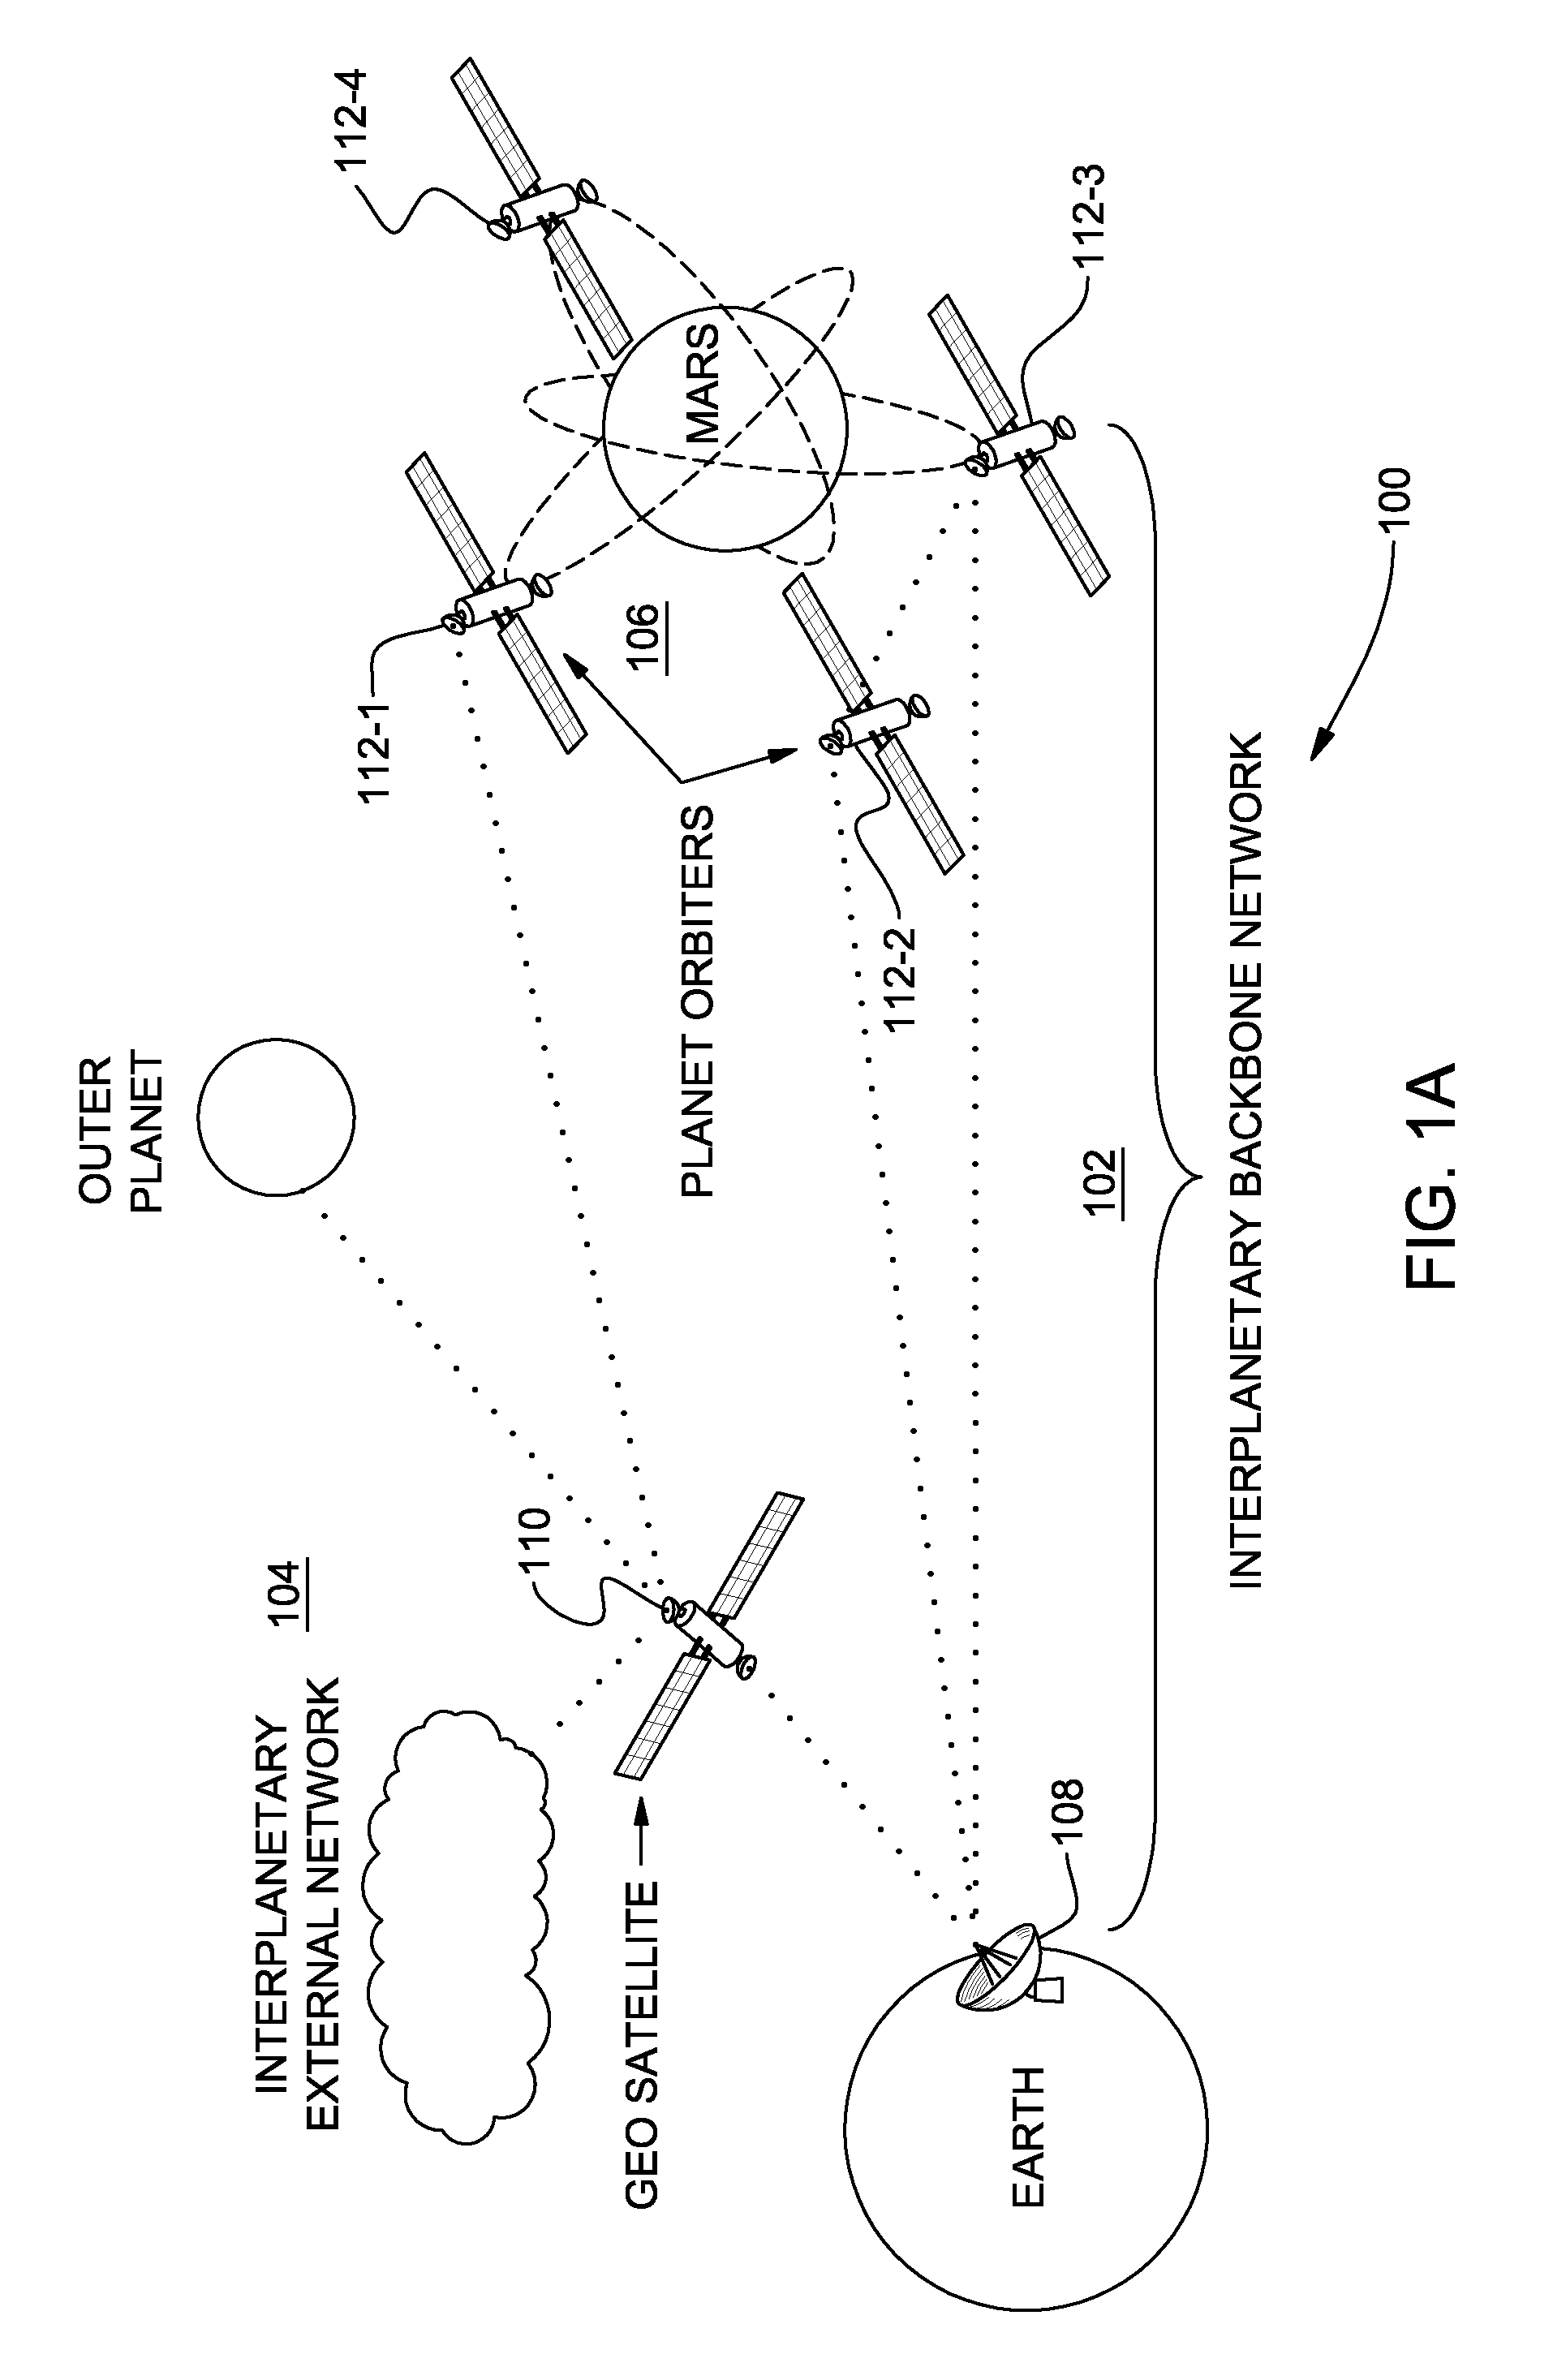 Remote gateway selection in an interplanetary communications network and method of selecting and handing over remote gateways